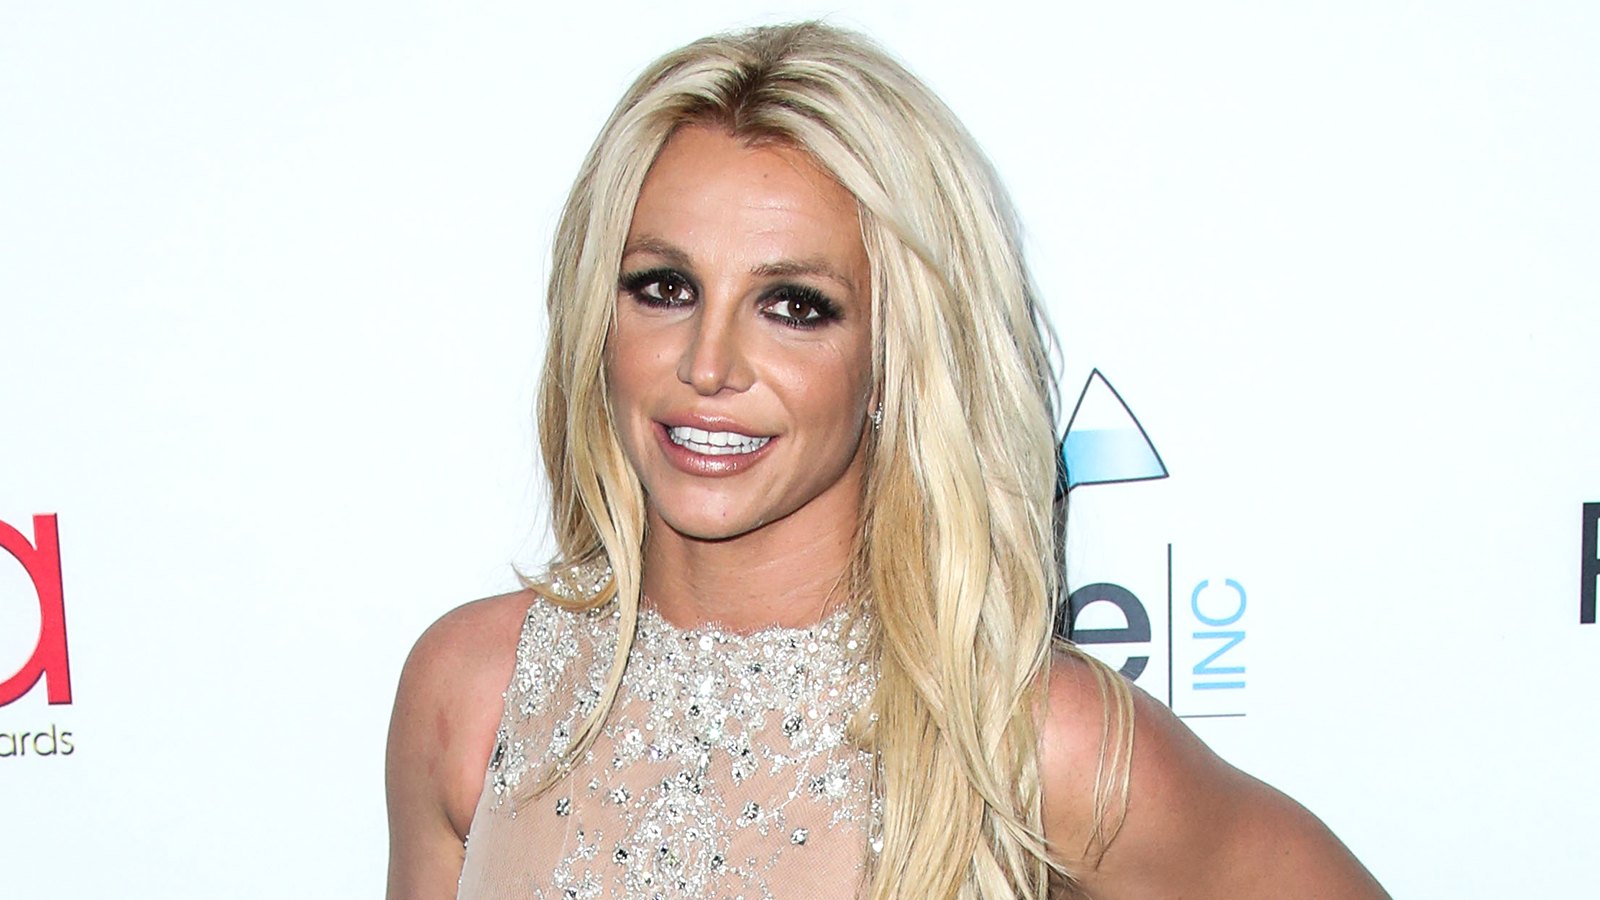 Britney Spears Posts Cryptic Message About New Addition to Family After Sharing She Wants to Have a Baby